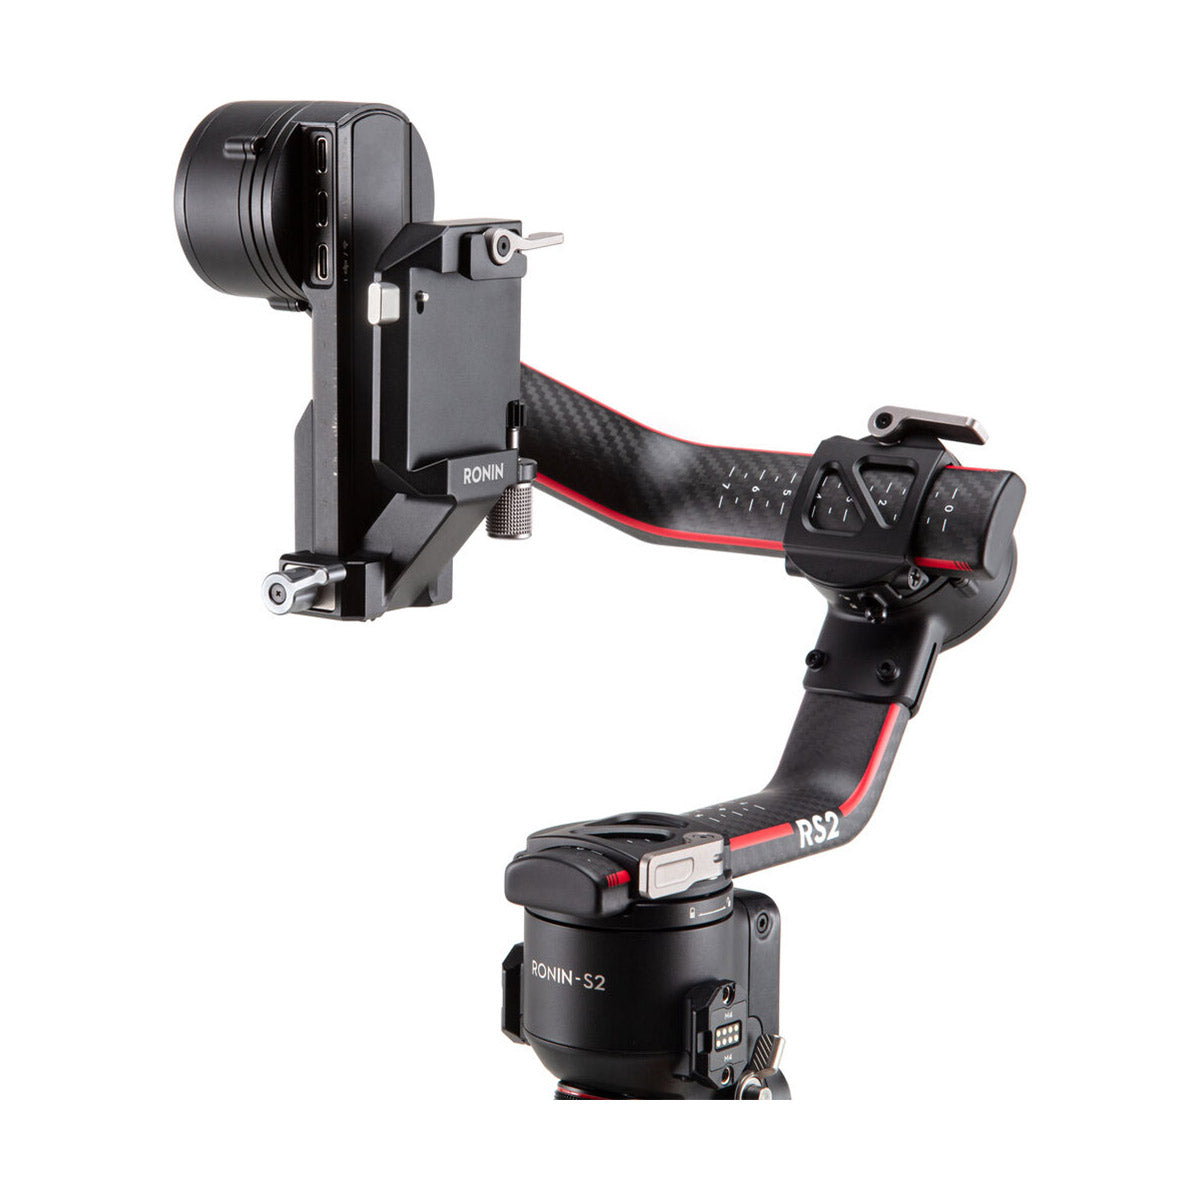 image_note gimbal sold separately